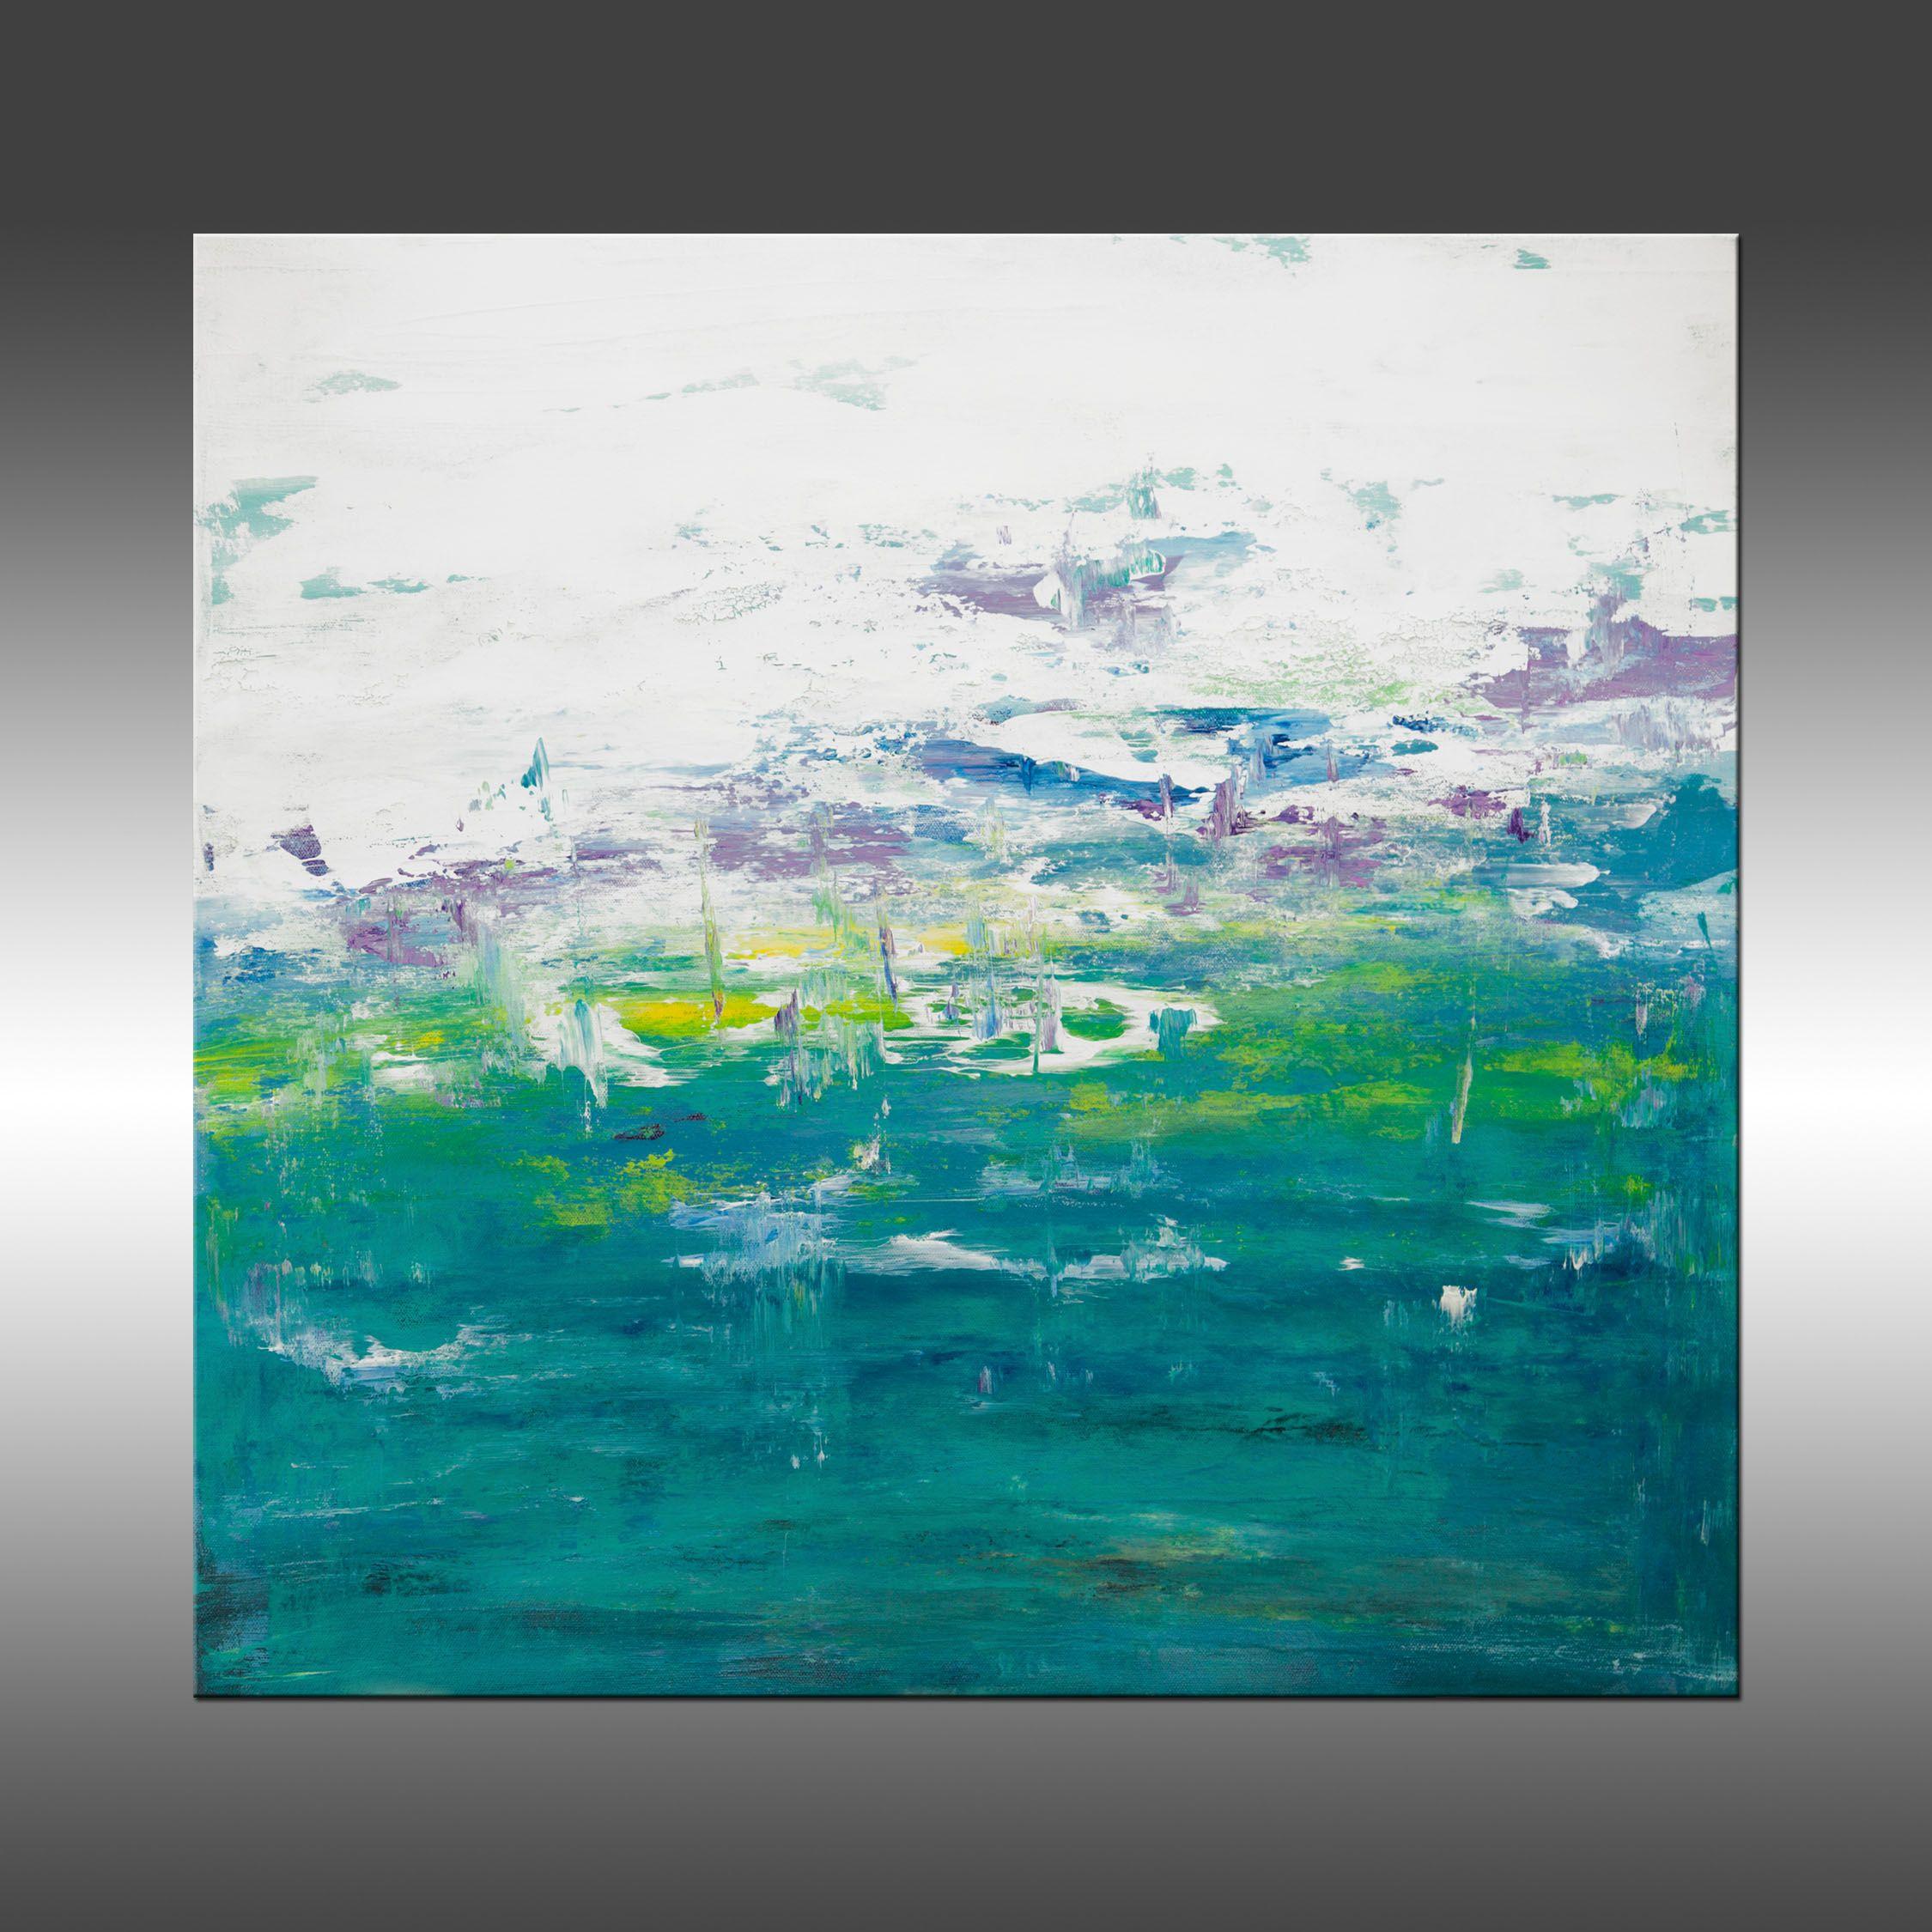 Ascension 12 is an original painting, created with acrylic paint on an unstretched canvas. It has a width of 24 inches and a height of 23 inches (23x24 inches).    The colors used in the painting are yellow, teal, white, blue, green, violet, and